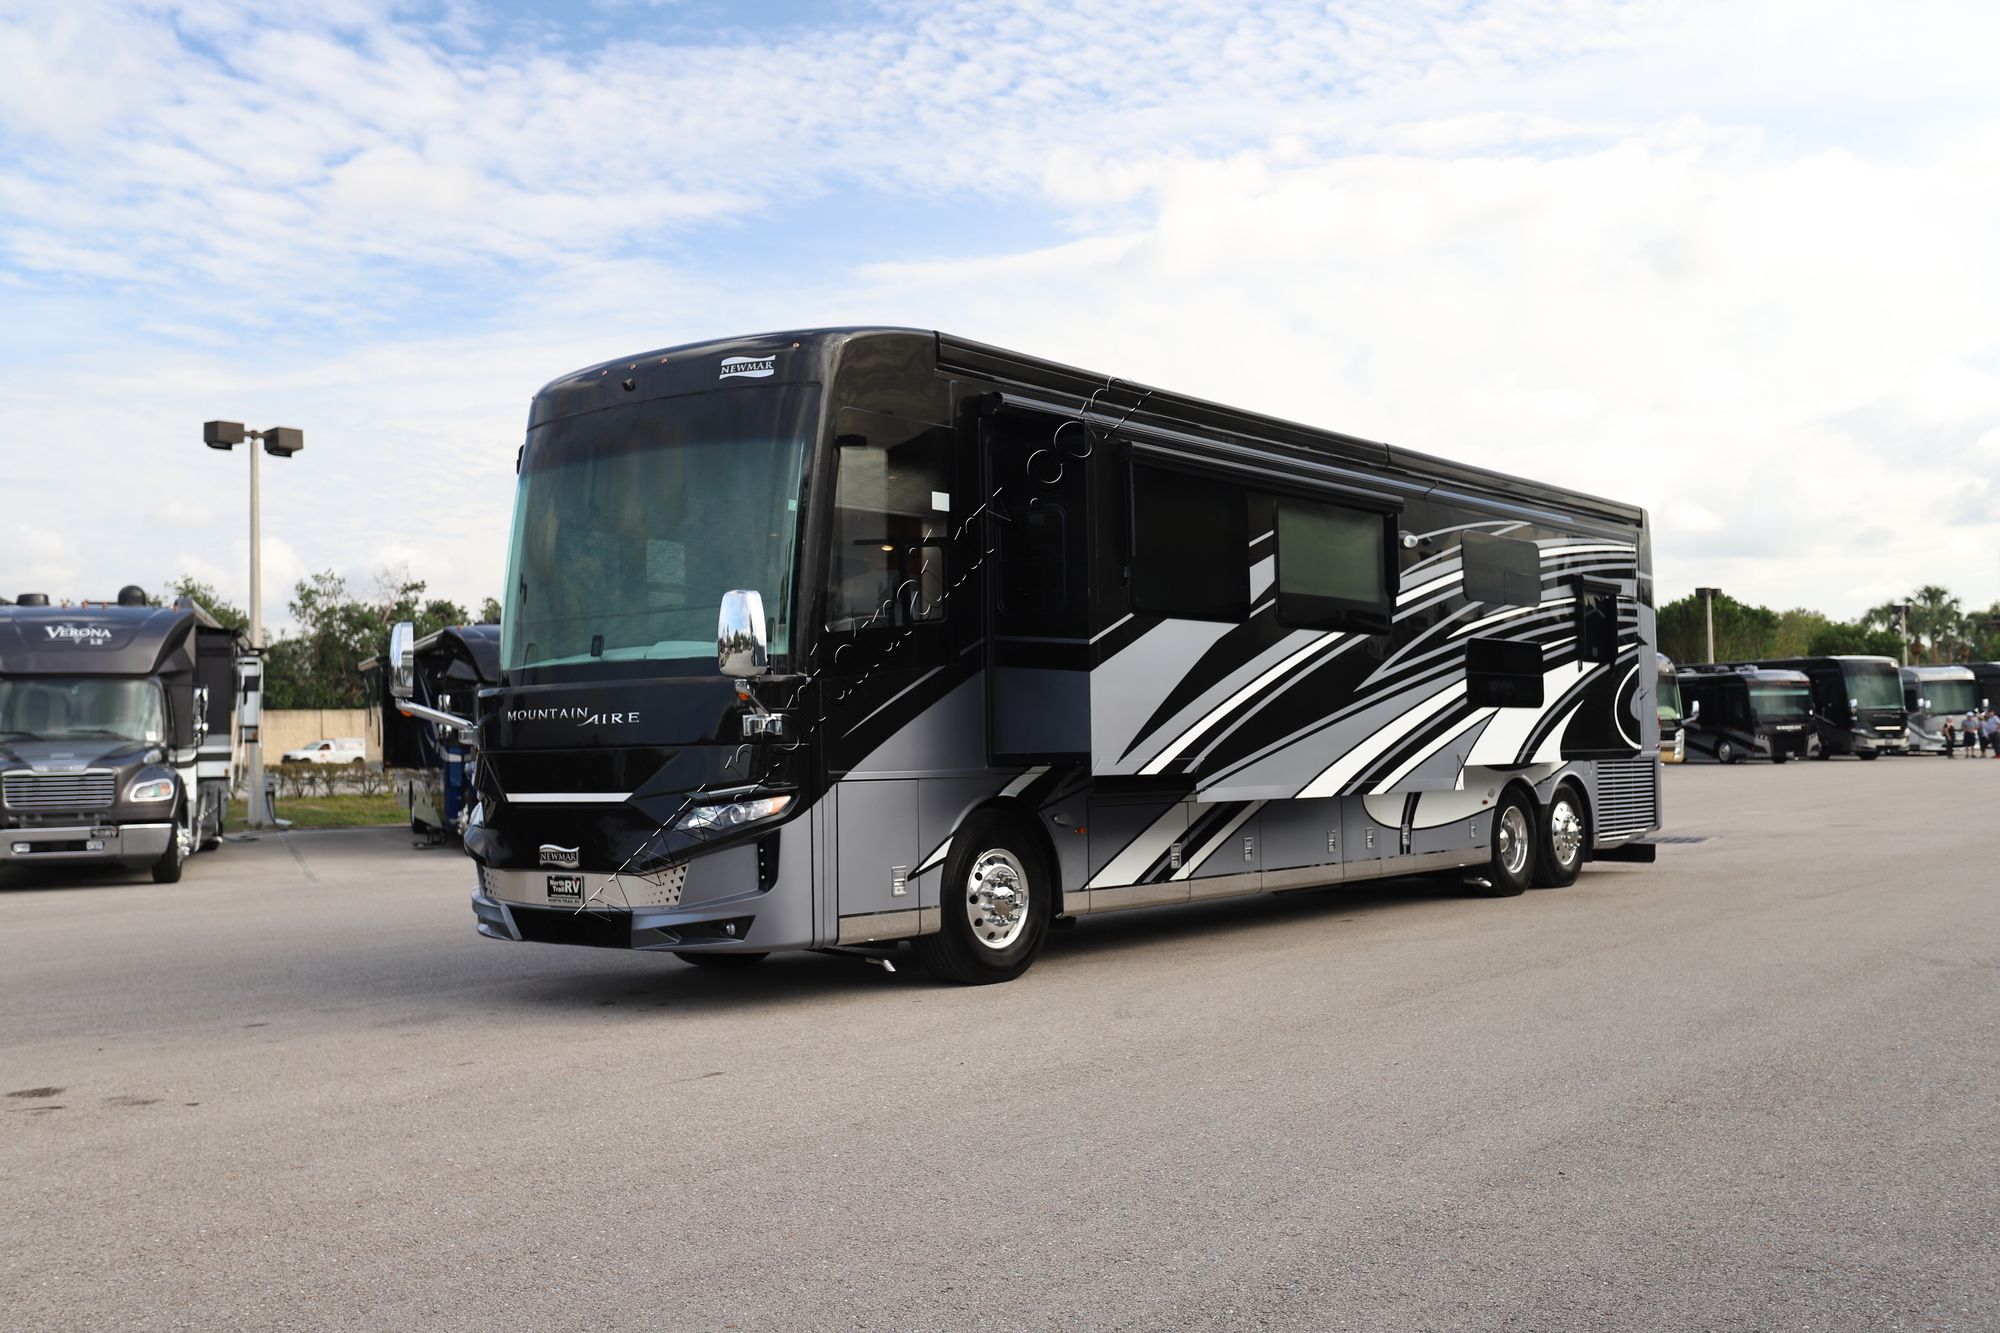 Used 2022 Newmar Mountain Aire 4535 Class A  For Sale